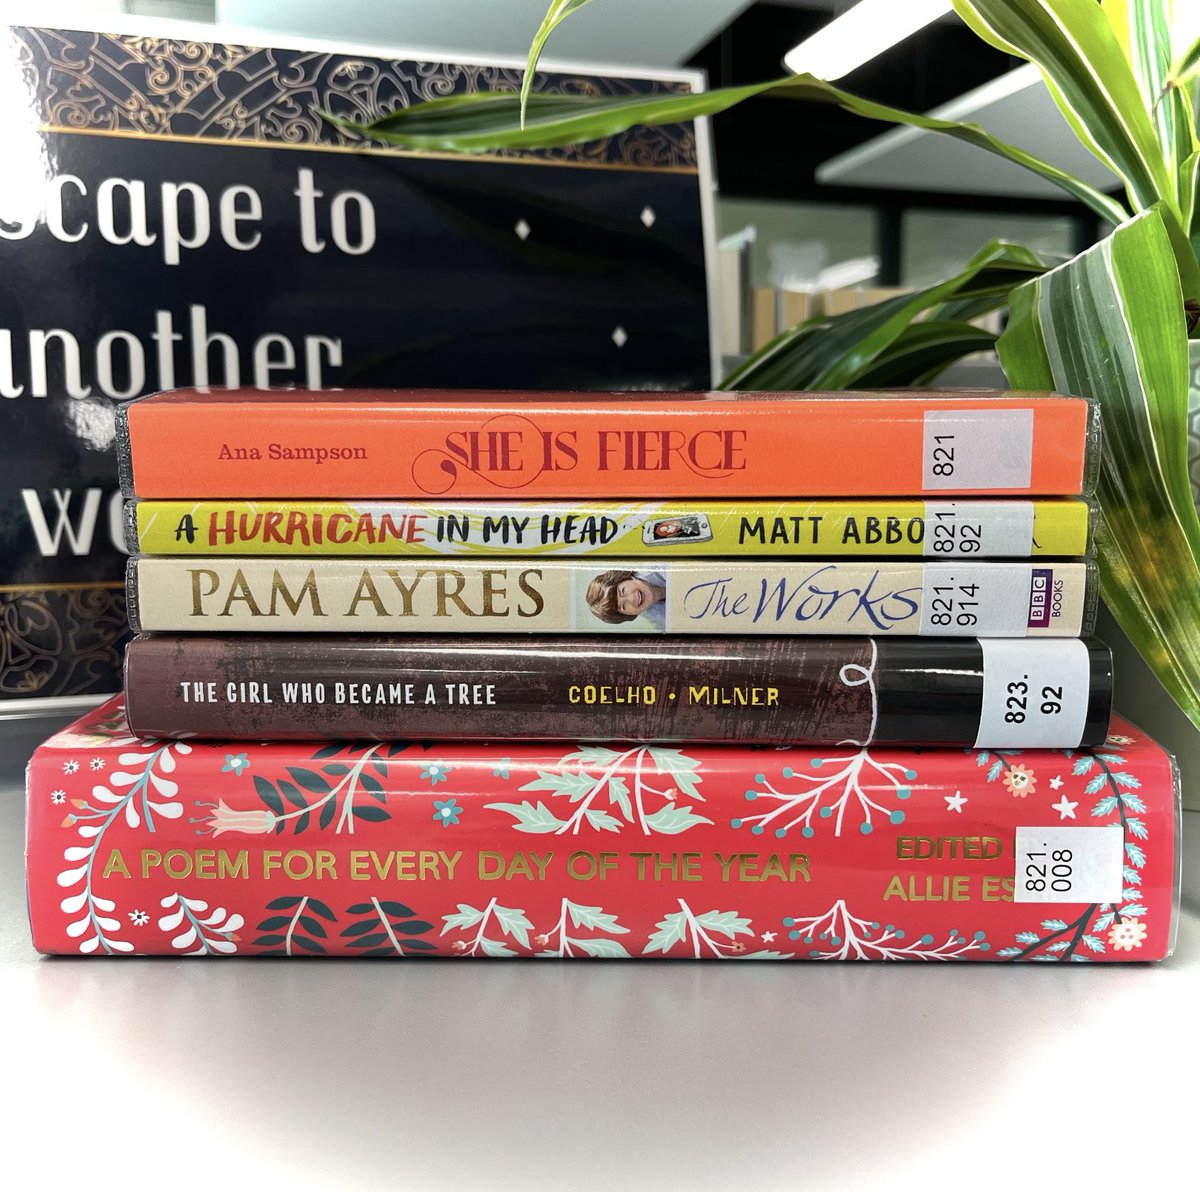 NEW!!

We have some lovely new poetry books available for you to borrow from the LRC. 
Who’s your favourite poet/poem?

#poetry #poet #poem #newin #sheisfierce #ahurricaneinmyhead #theworks #thegirlwhobecameatree #apoemforeverydayoftheyear